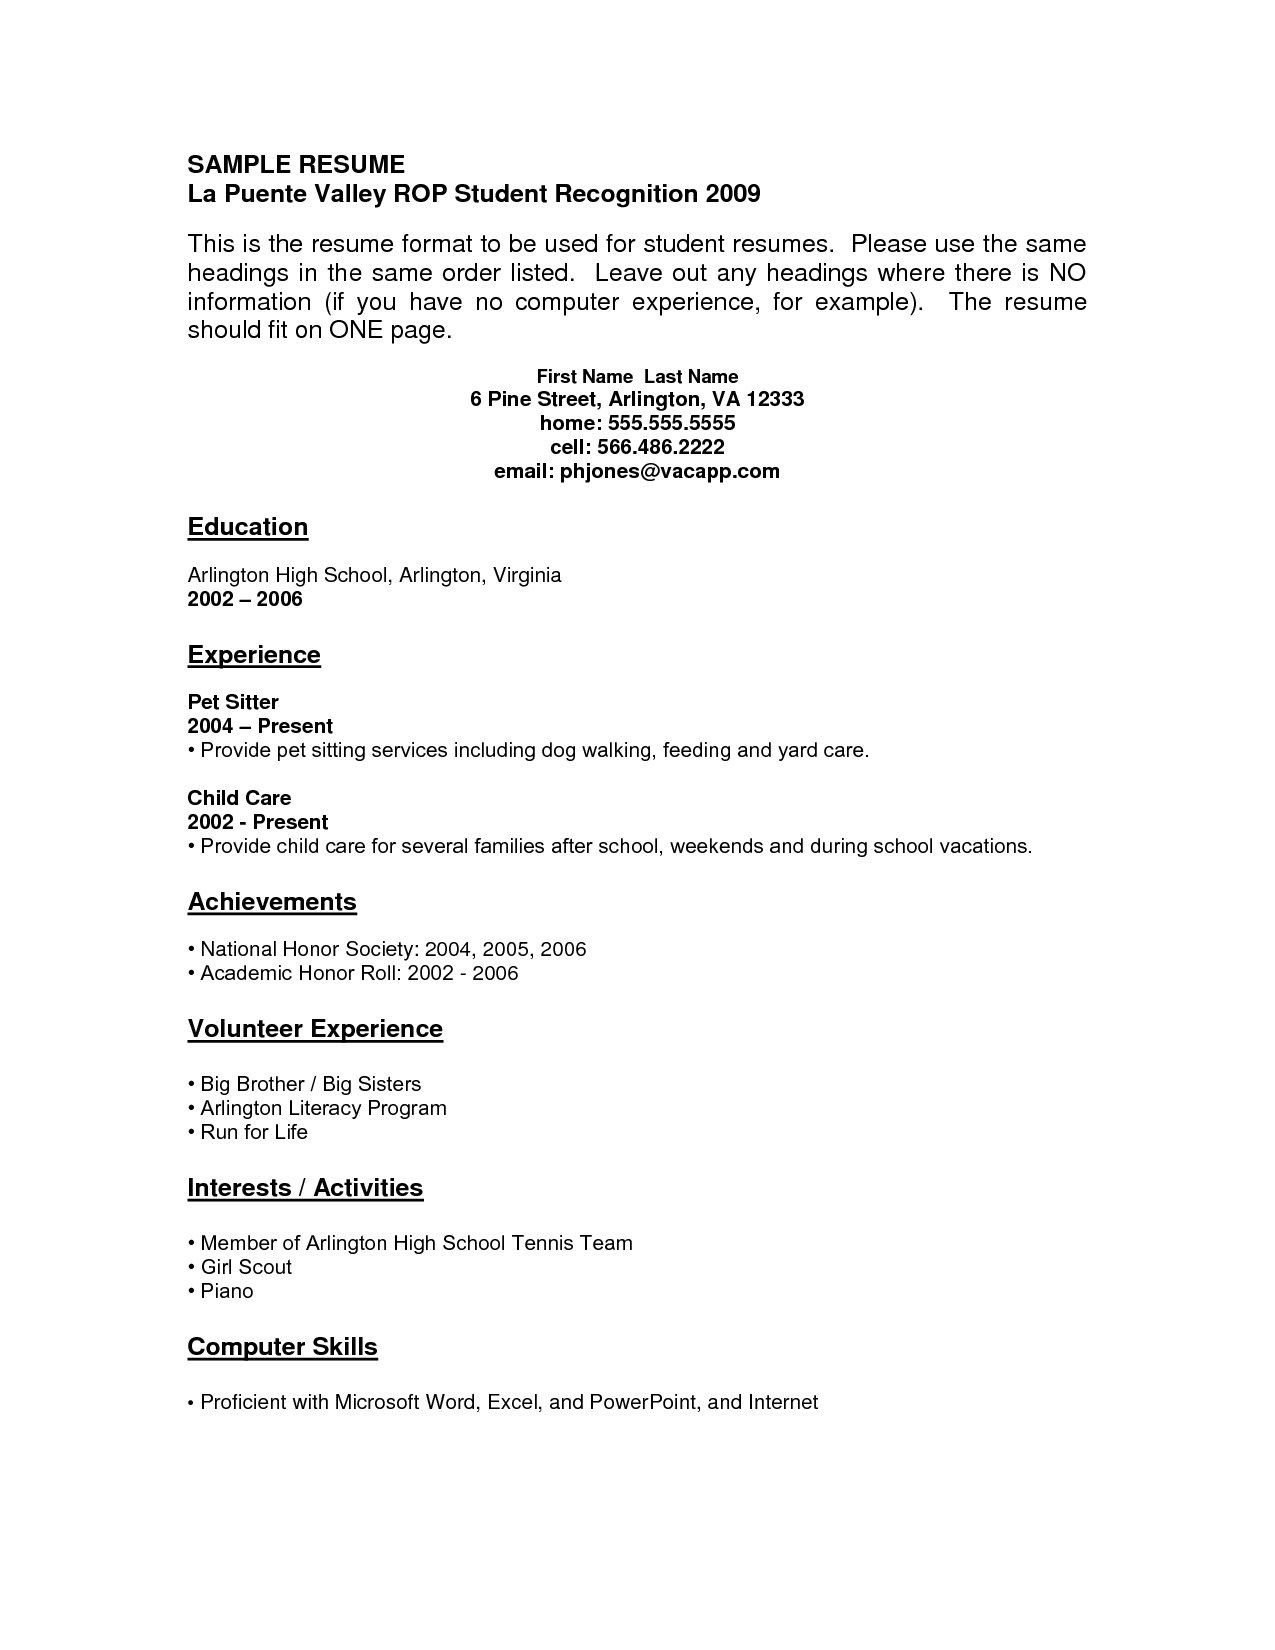 Resume Sample for someone with No Work Experience Resume Examples with No Job Experience – Resume Templates Job …